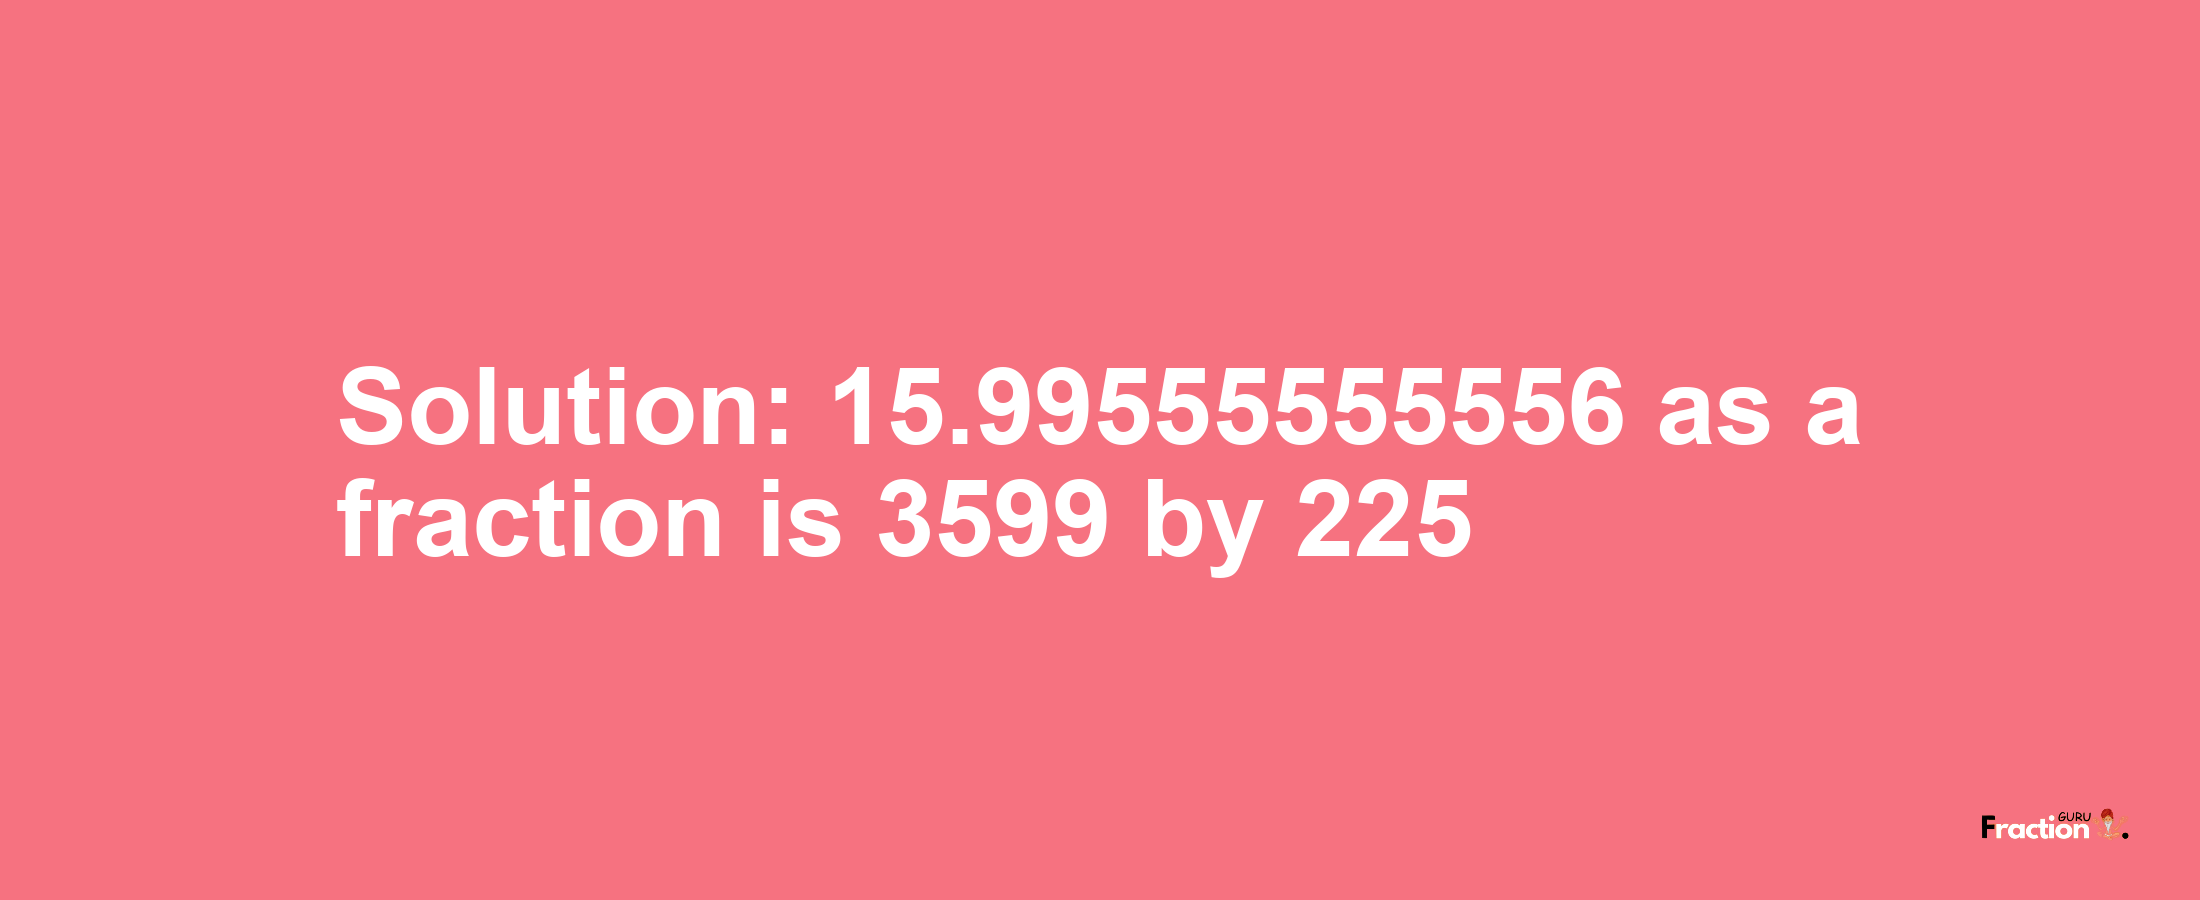 Solution:15.99555555556 as a fraction is 3599/225